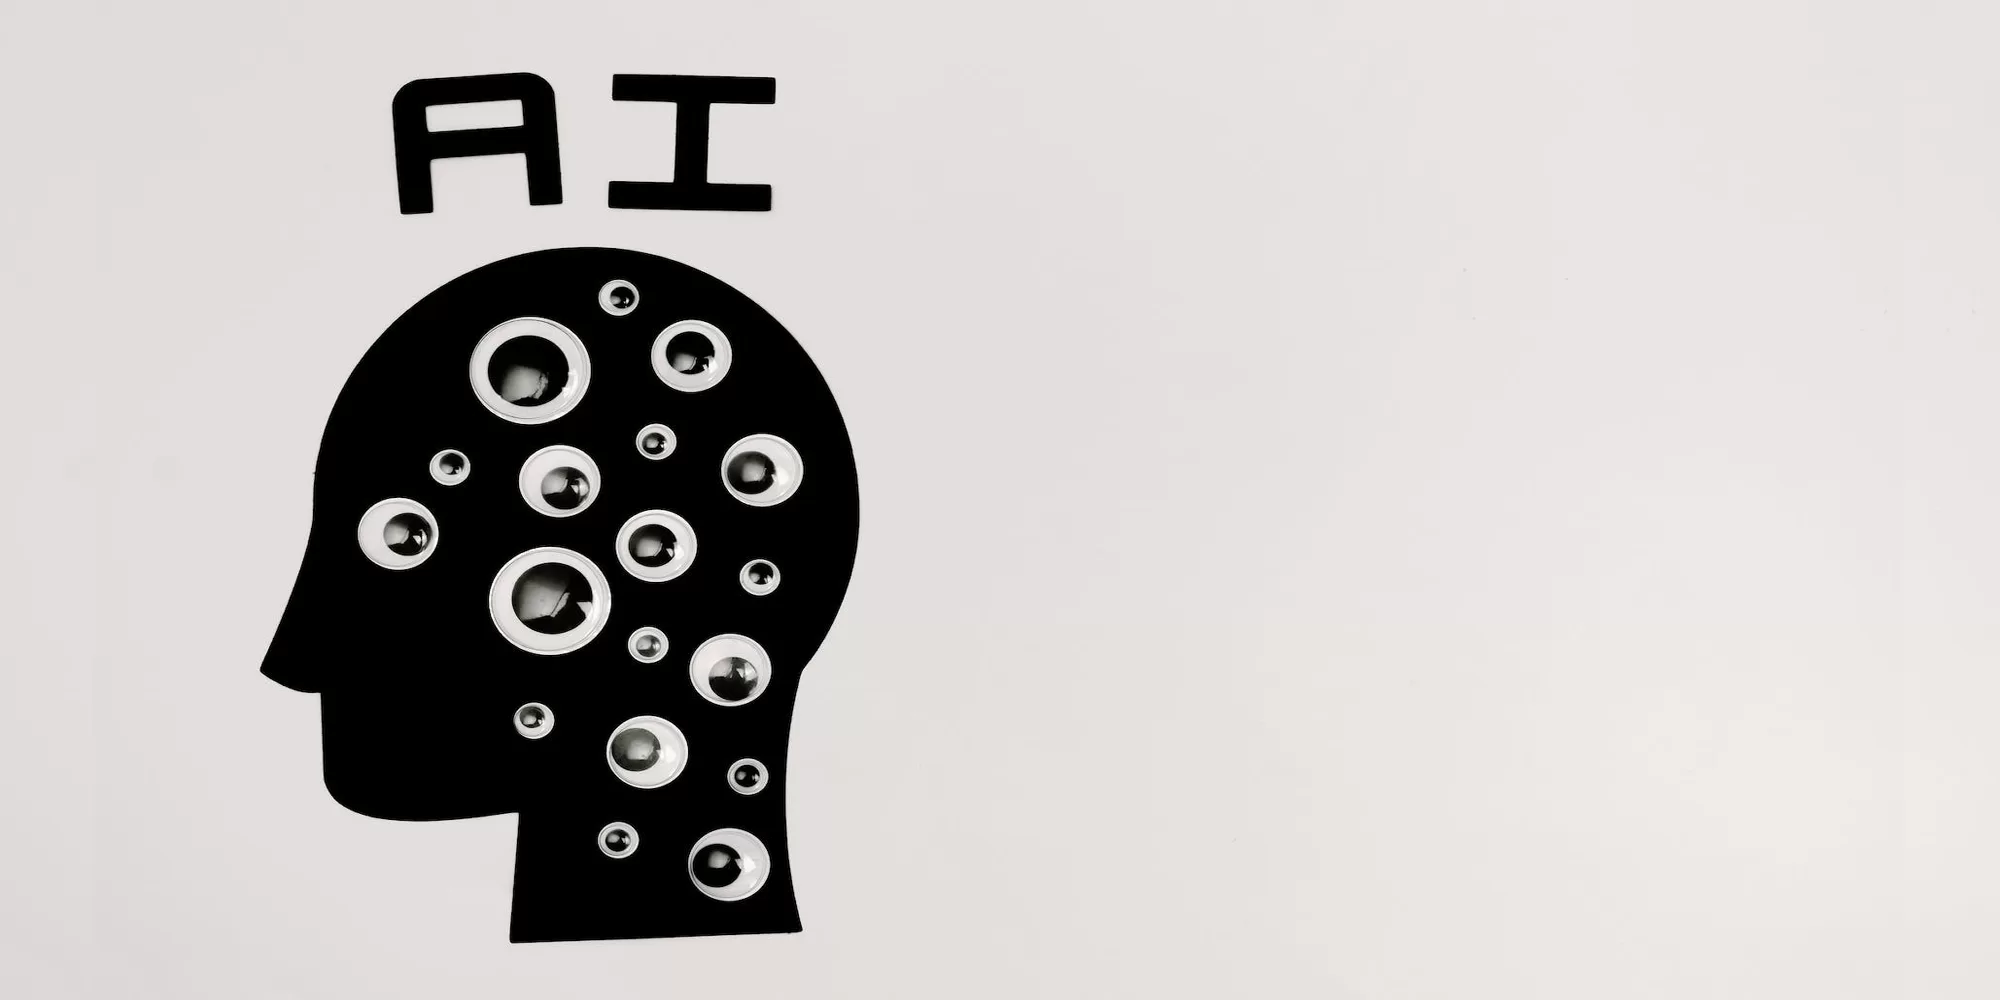 googly eyes on a silhouette of a face with the letters AI about Photo by Tara Winstead: https://www.pexels.com/photo/an-artificial-intelligence-illustration-on-the-wall-8849295/